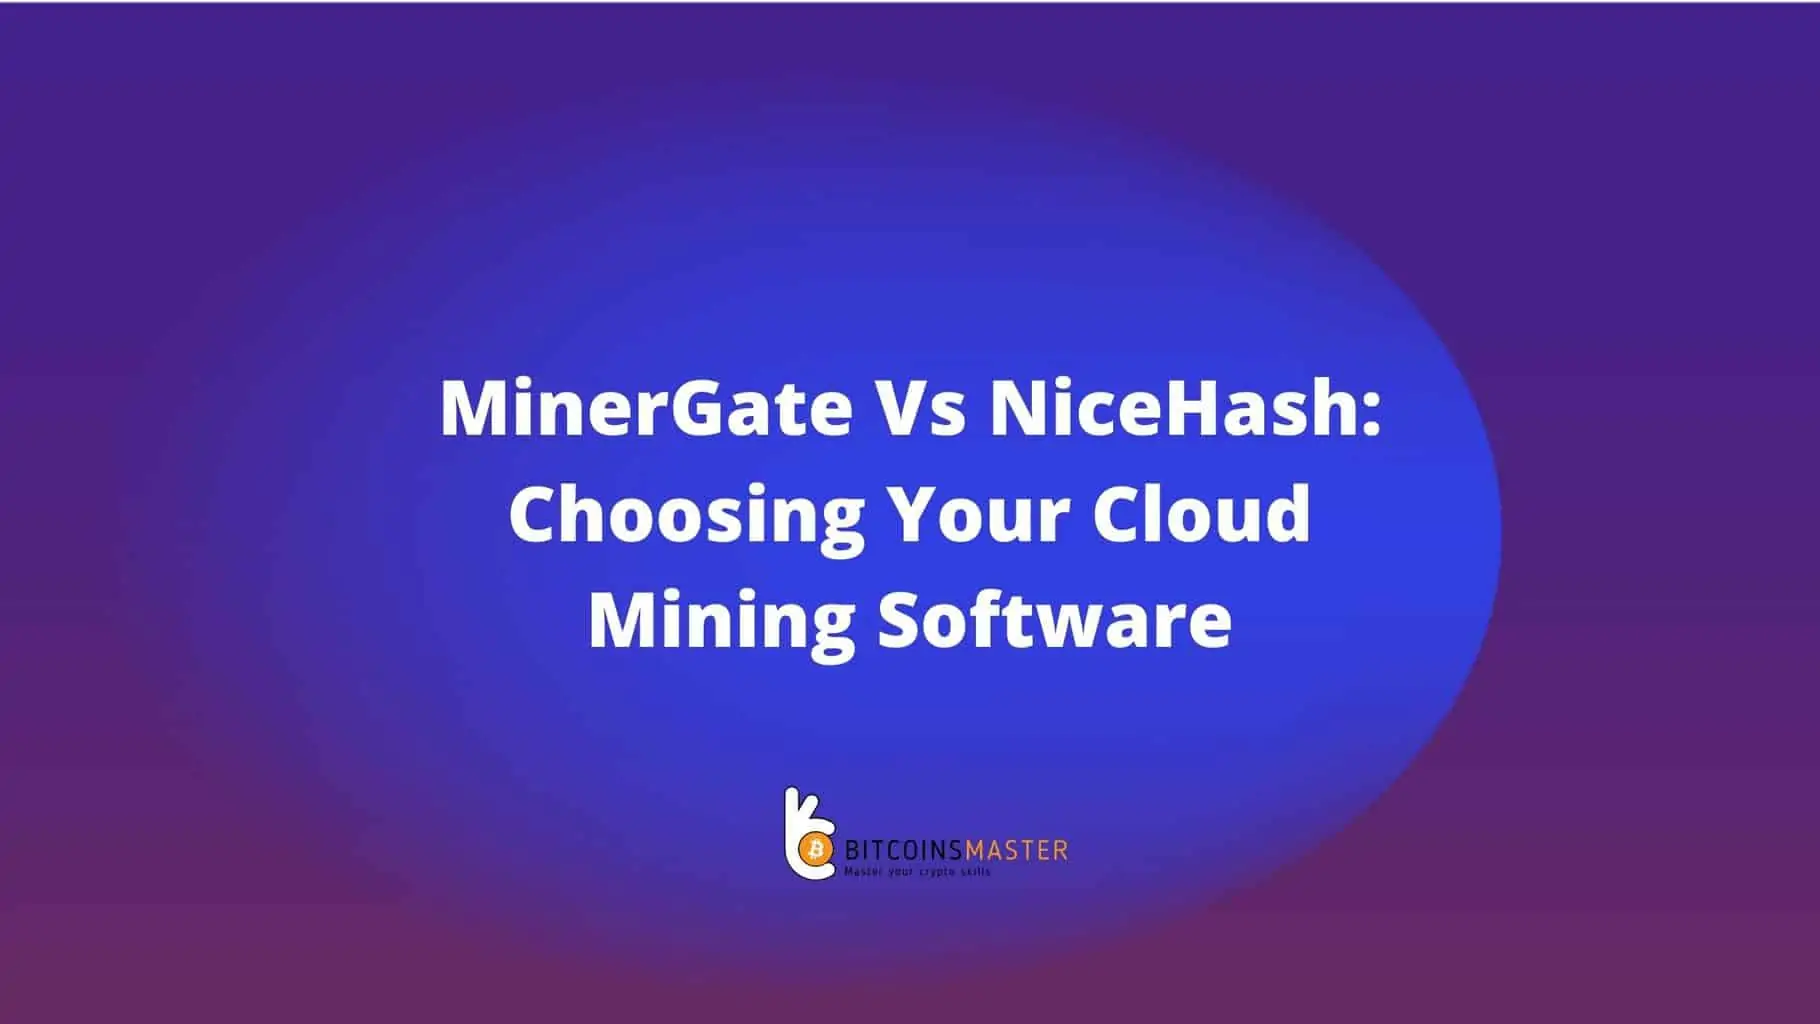 Minergate Vs Nicehash: Choosing Your Cloud Mining Software